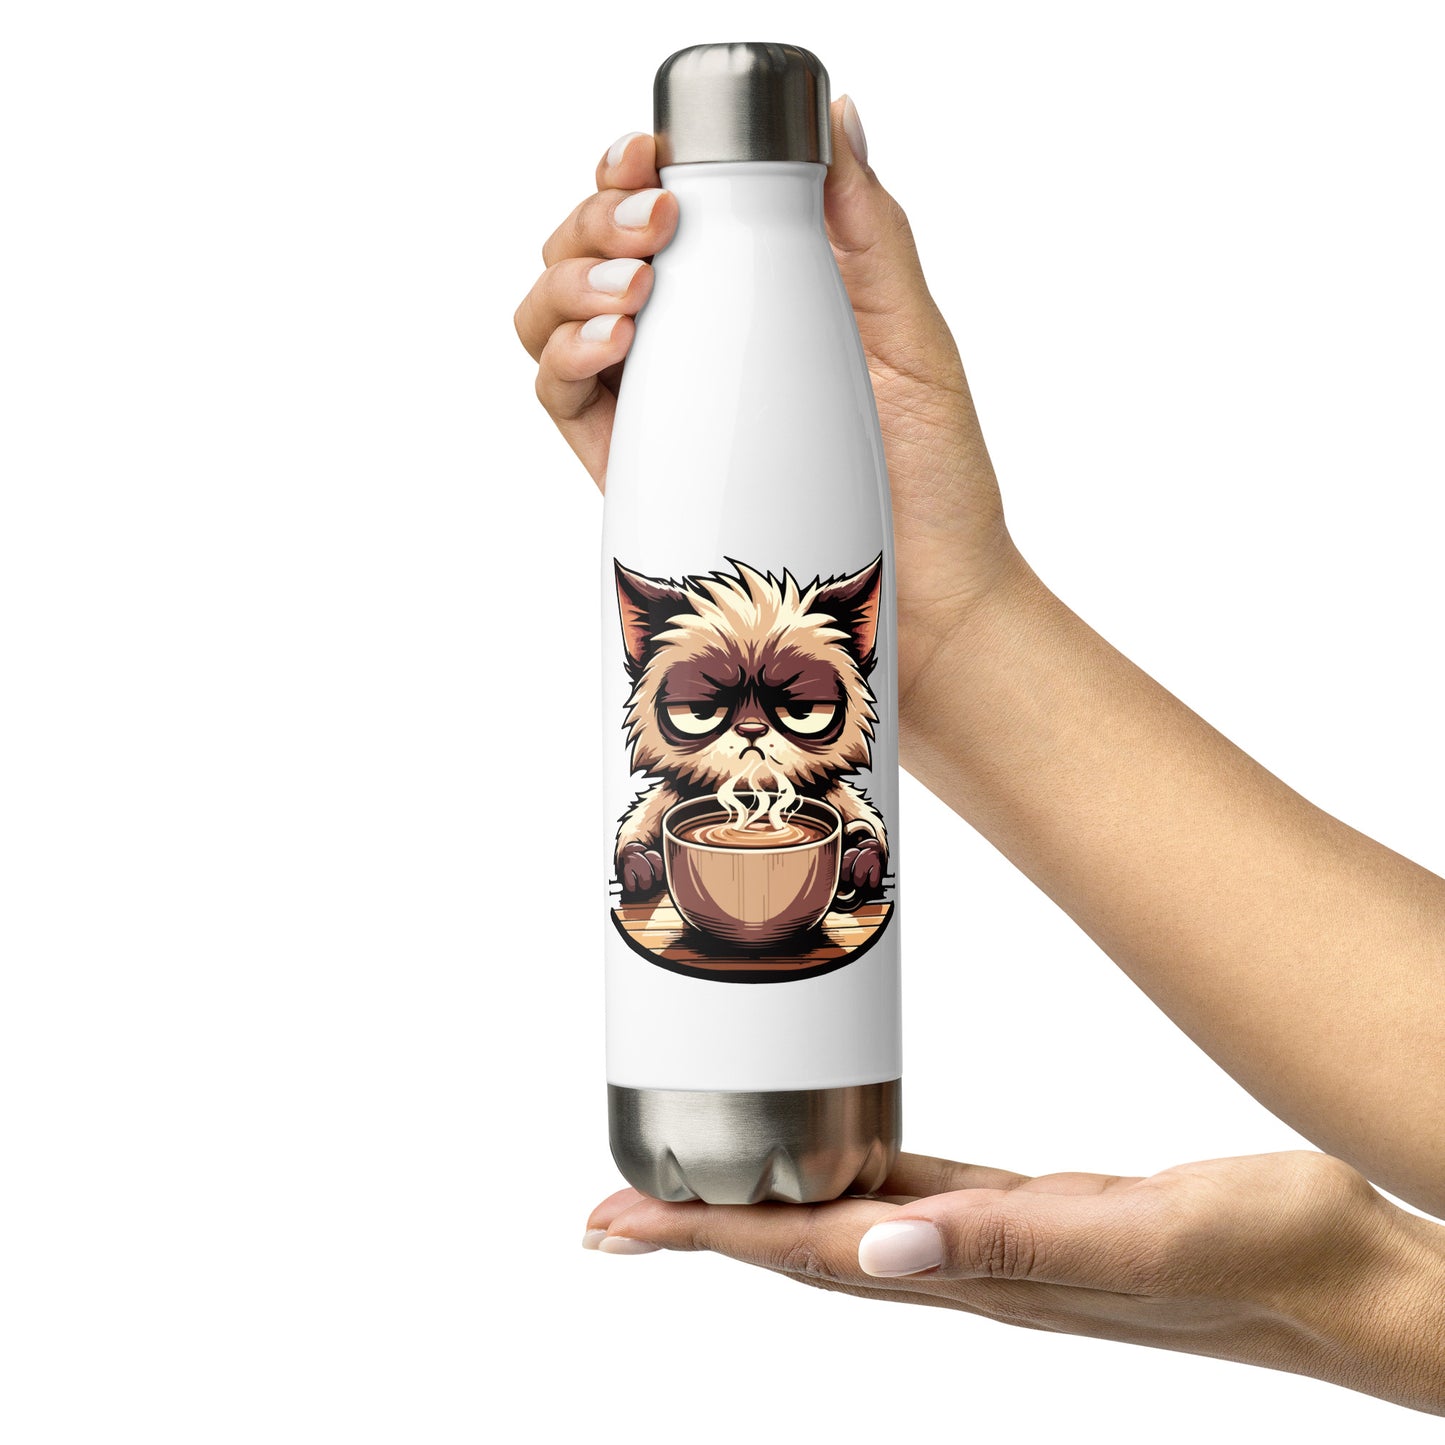 Cat-titude - Stainless steel water bottle